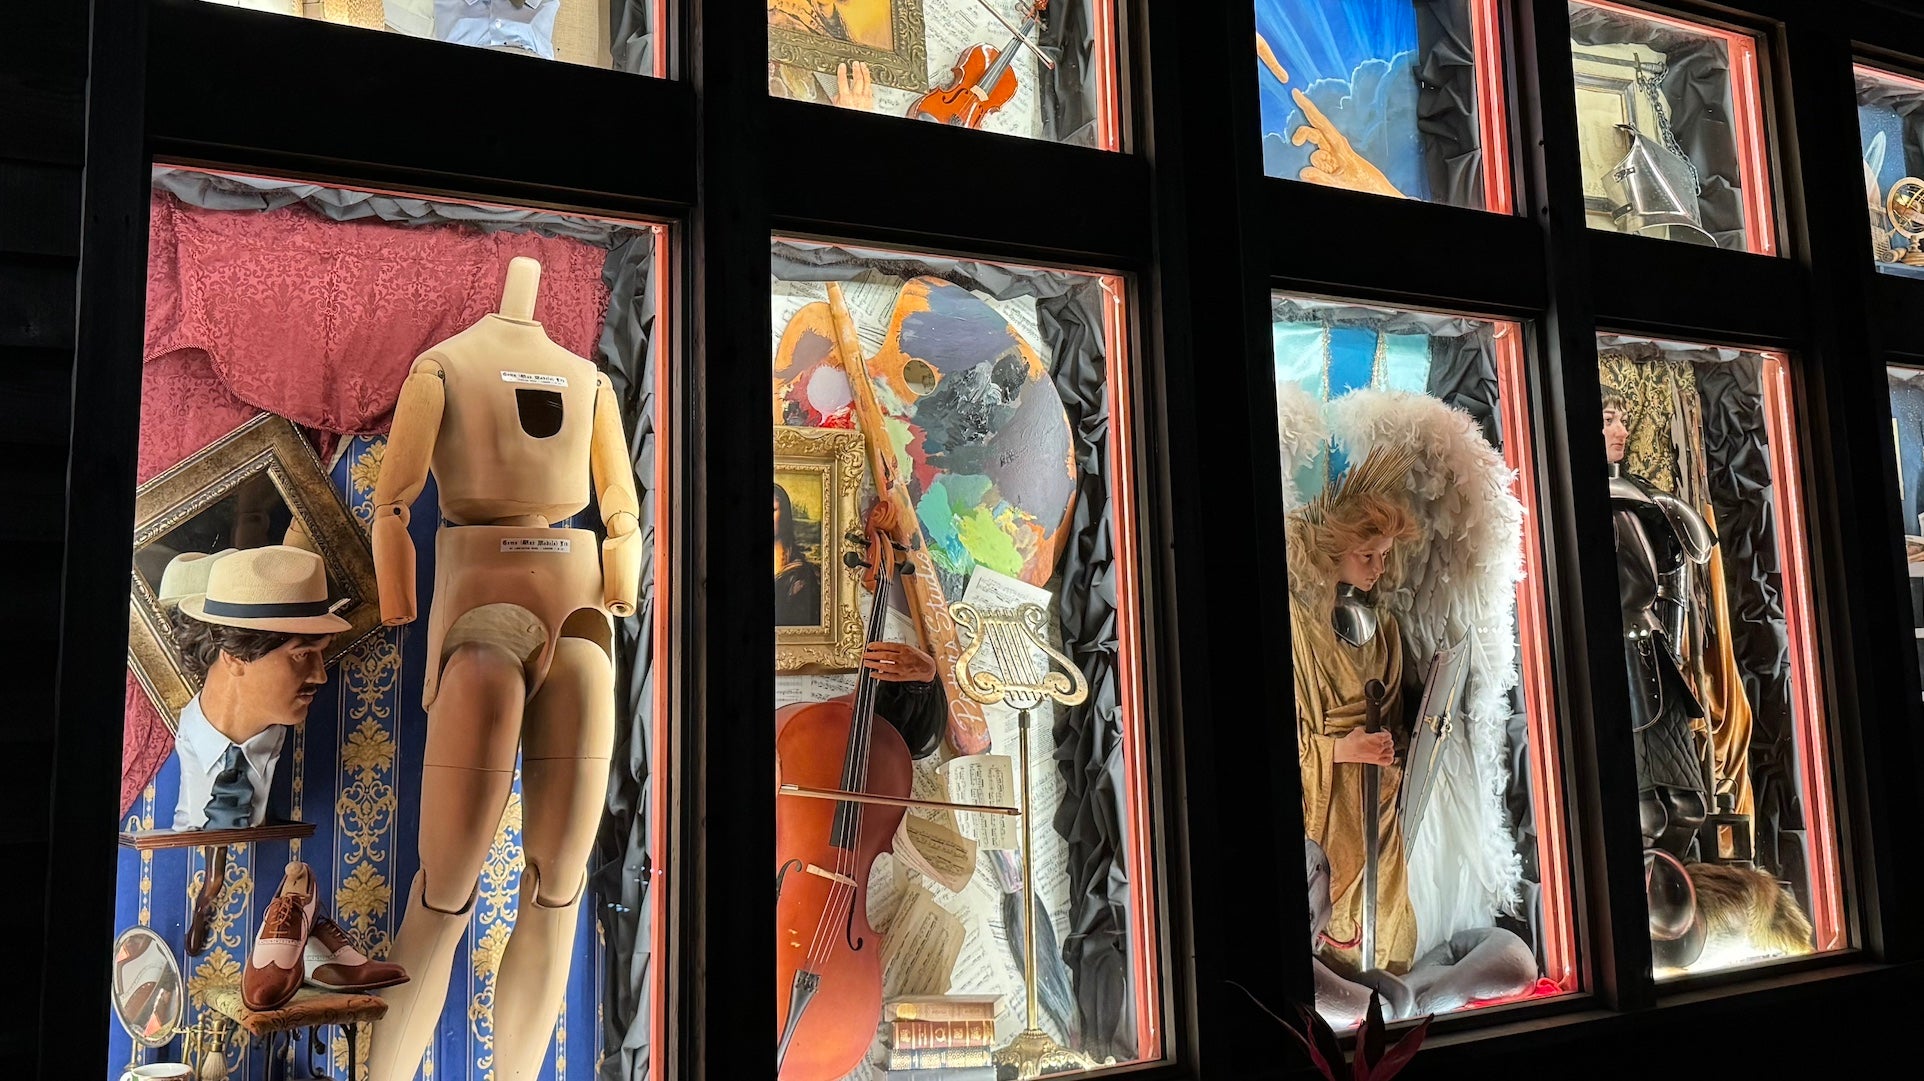 Mannequins and dolls in glass cases